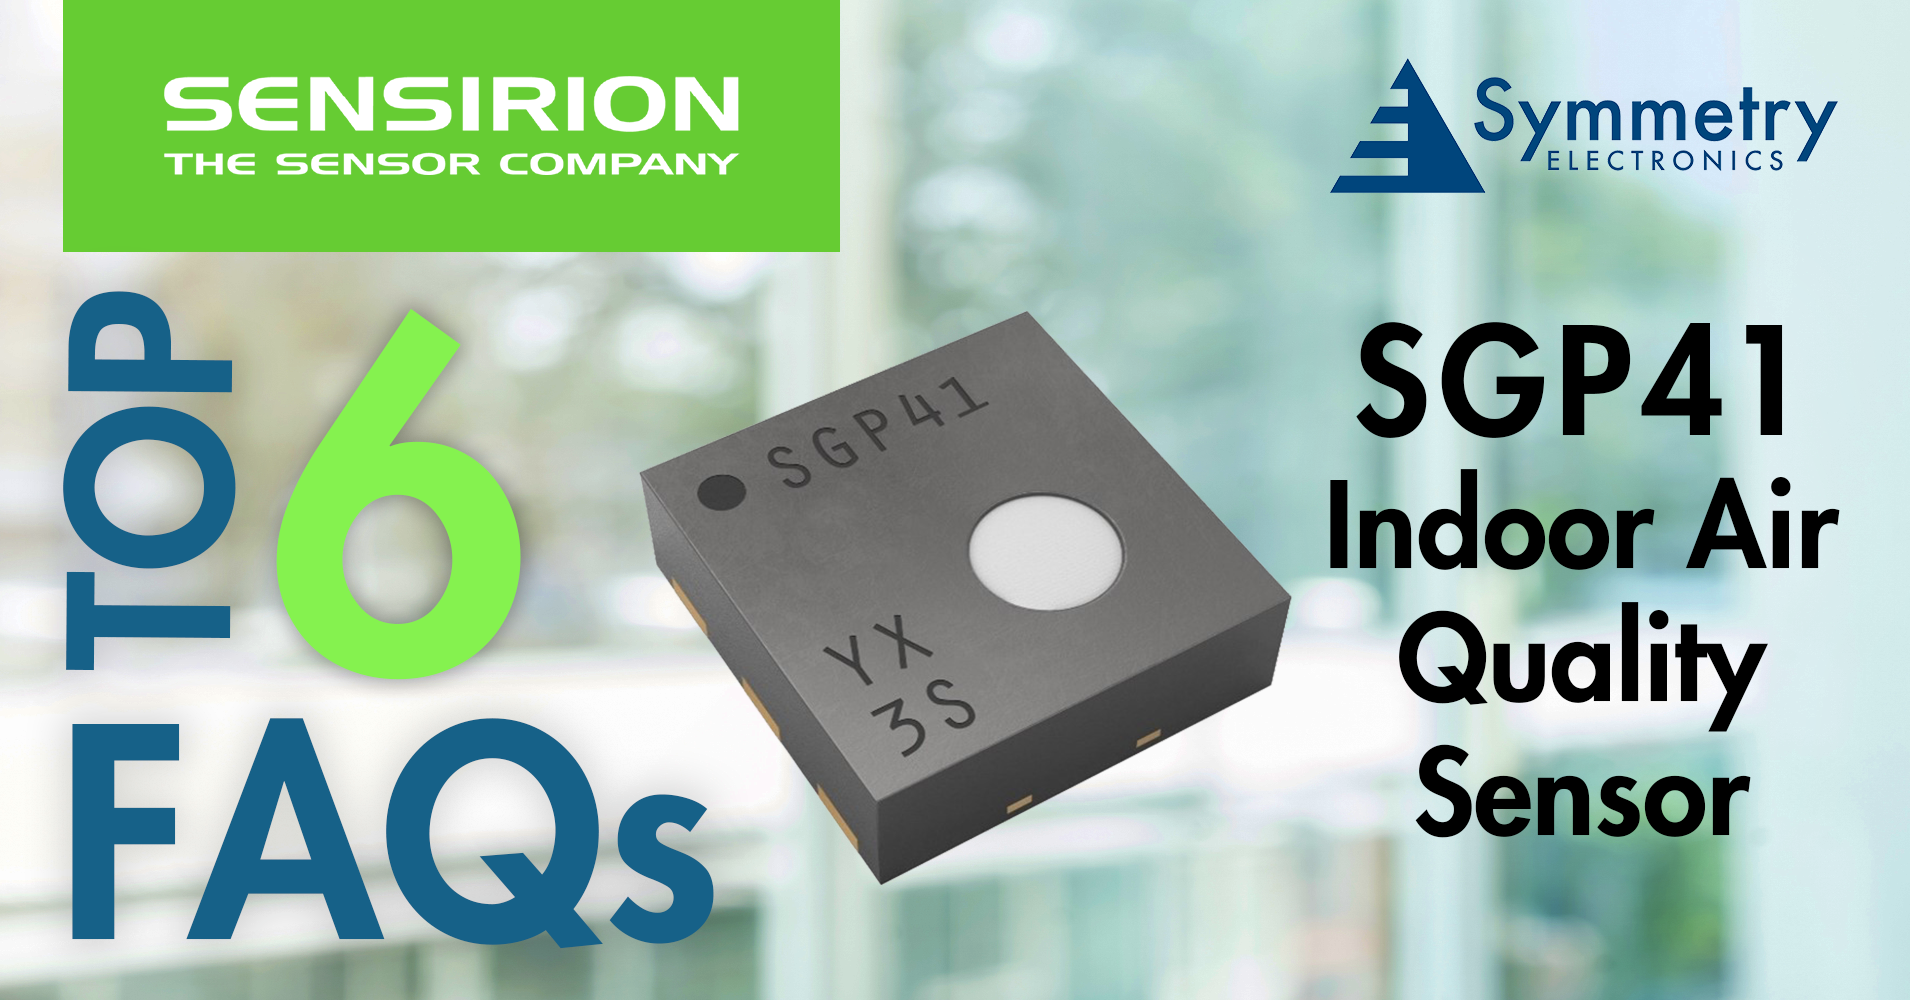 Sensirion's-SGP41-Indoor-Air-Quality-Sensor-Is-Available-At-Symmetry-Electronics